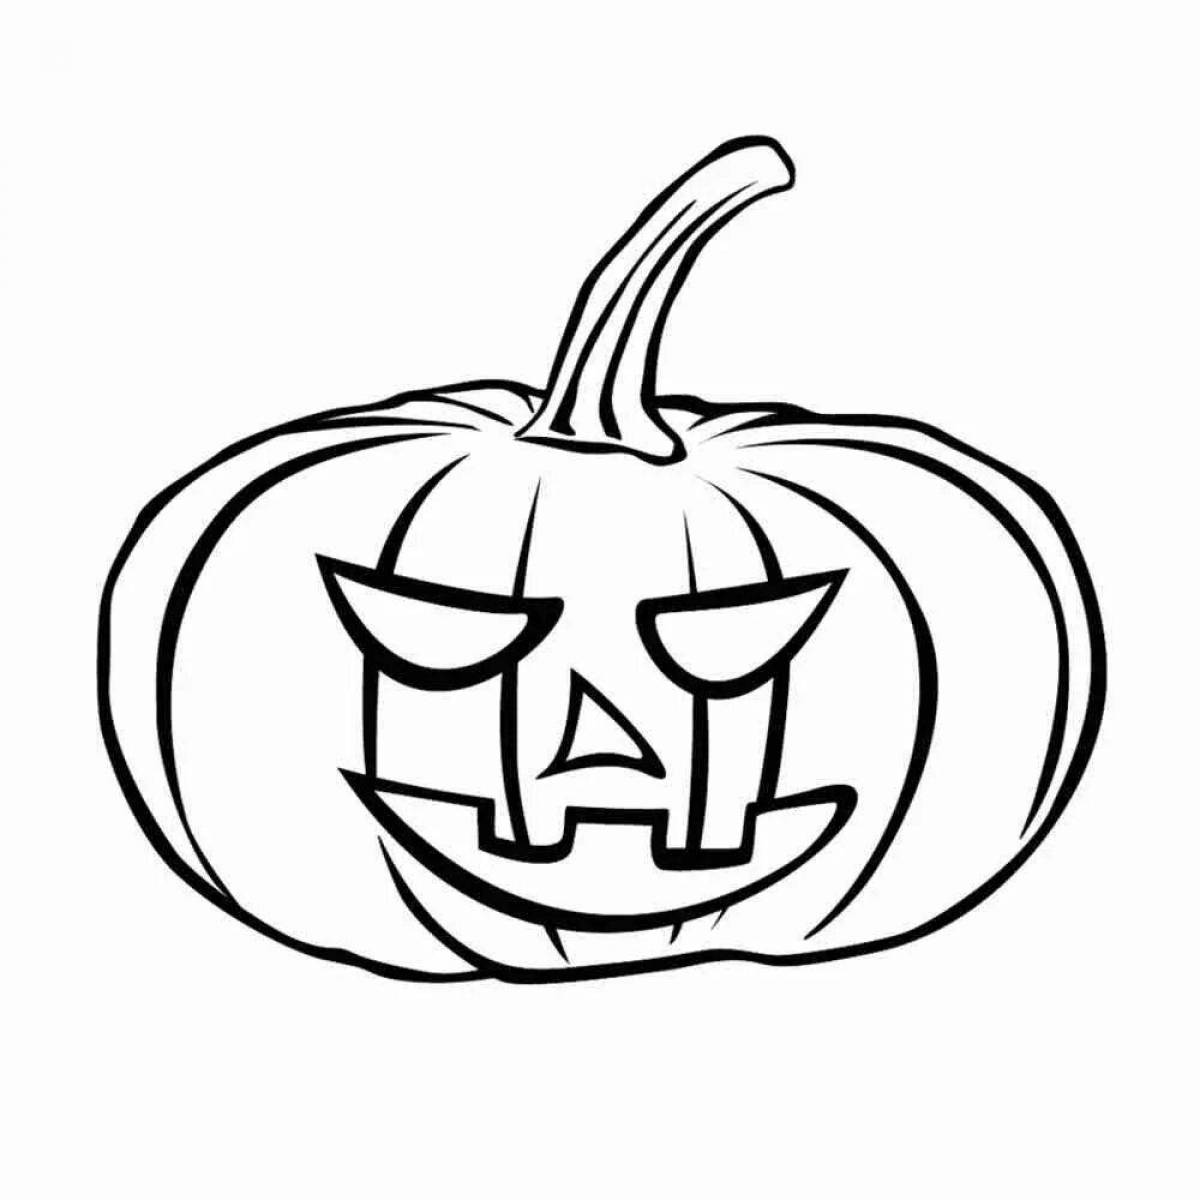 Cooling halloween pumpkin coloring page